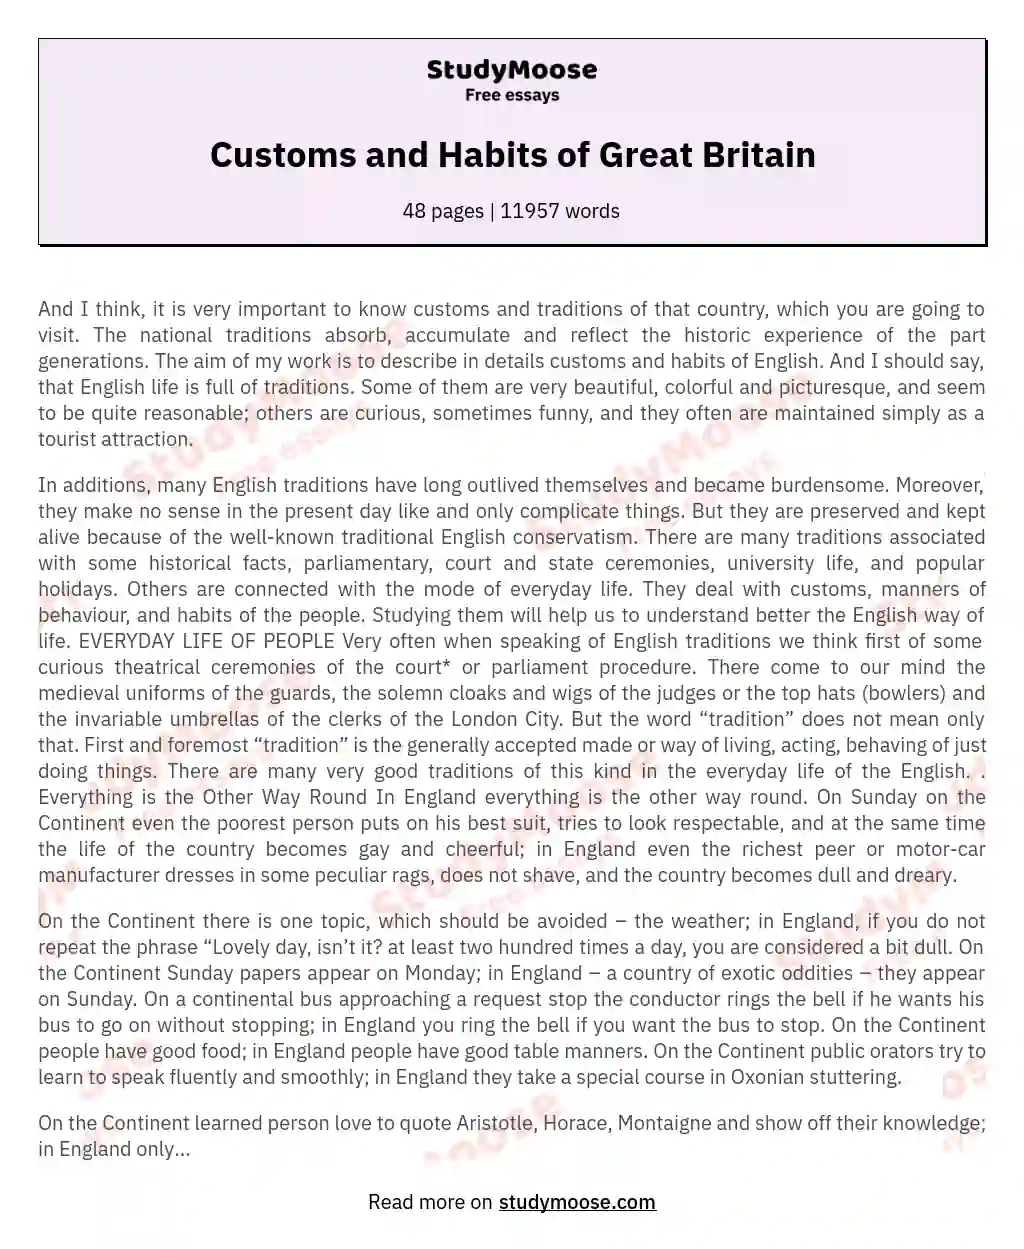 Customs and Habits of Great Britain essay